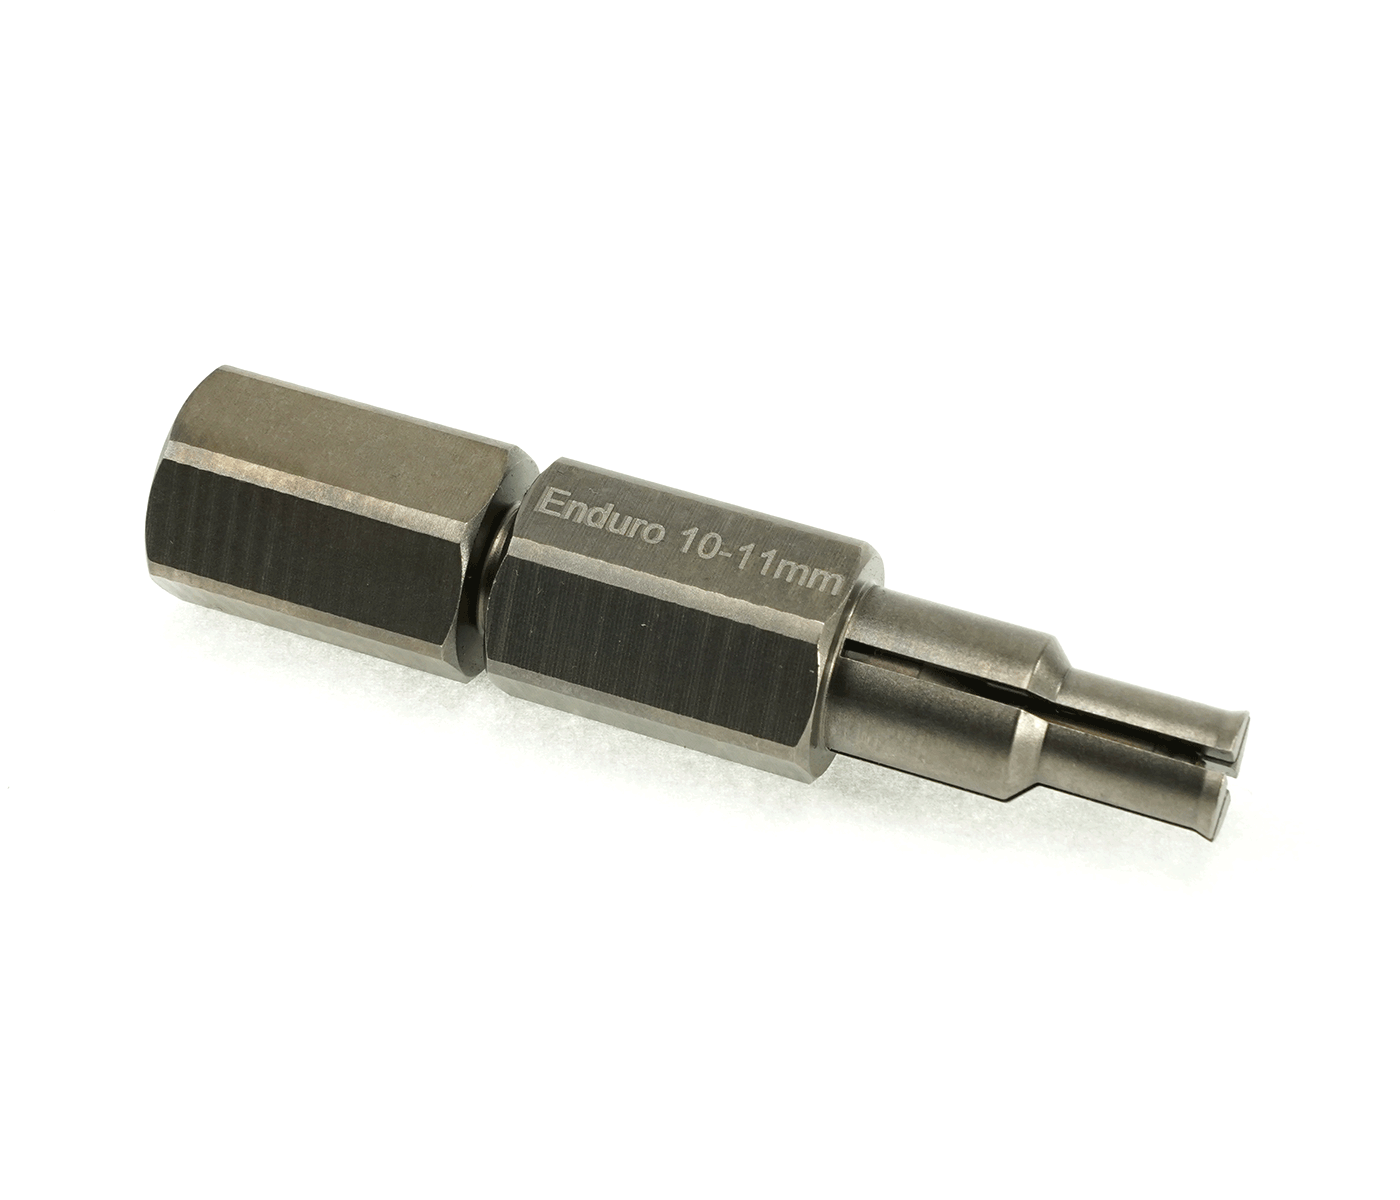 Enduro Puller 10-11 SS - stainless steel, Bearing Puller for bearings with 10-11mm IDs